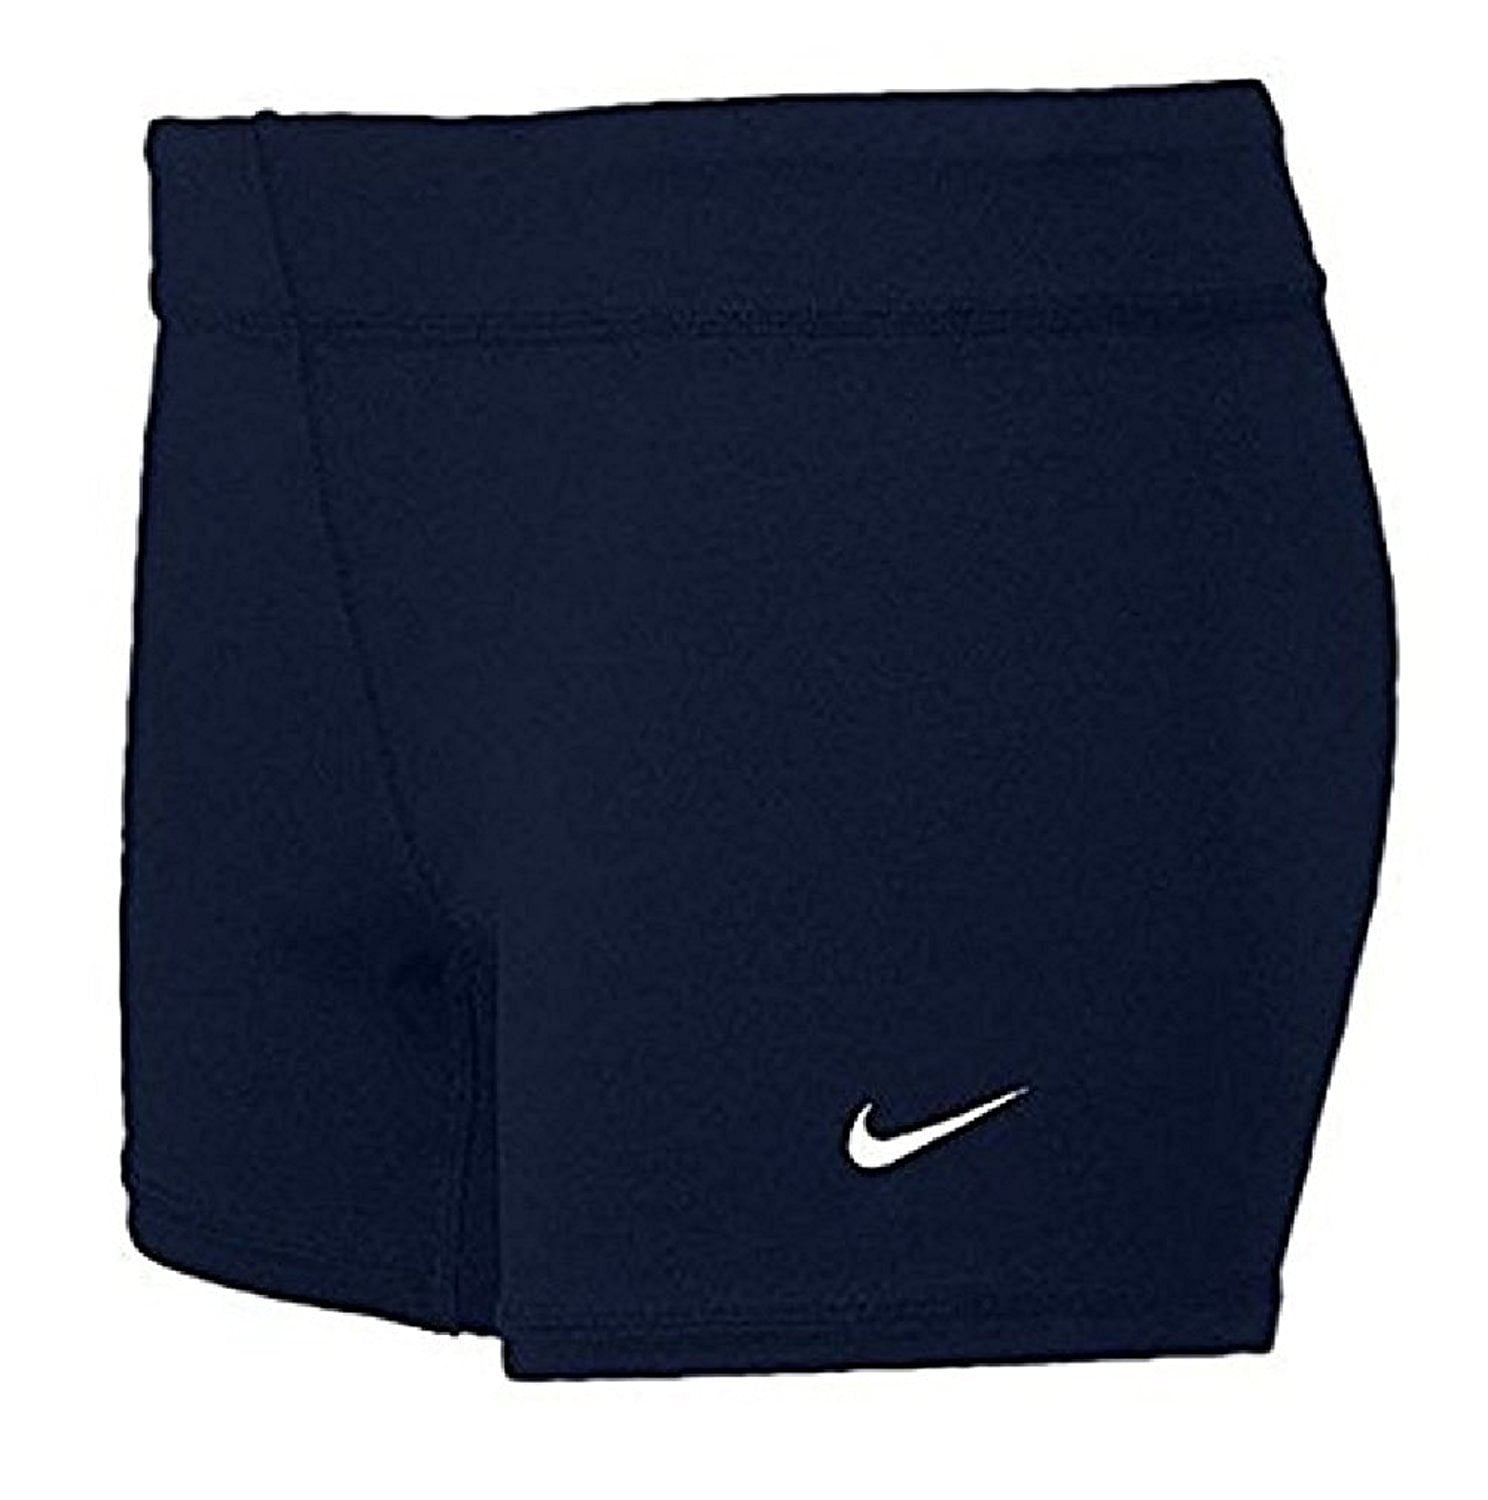 Nike Performance Women's Game Volleyball Shorts, Navy, XL 